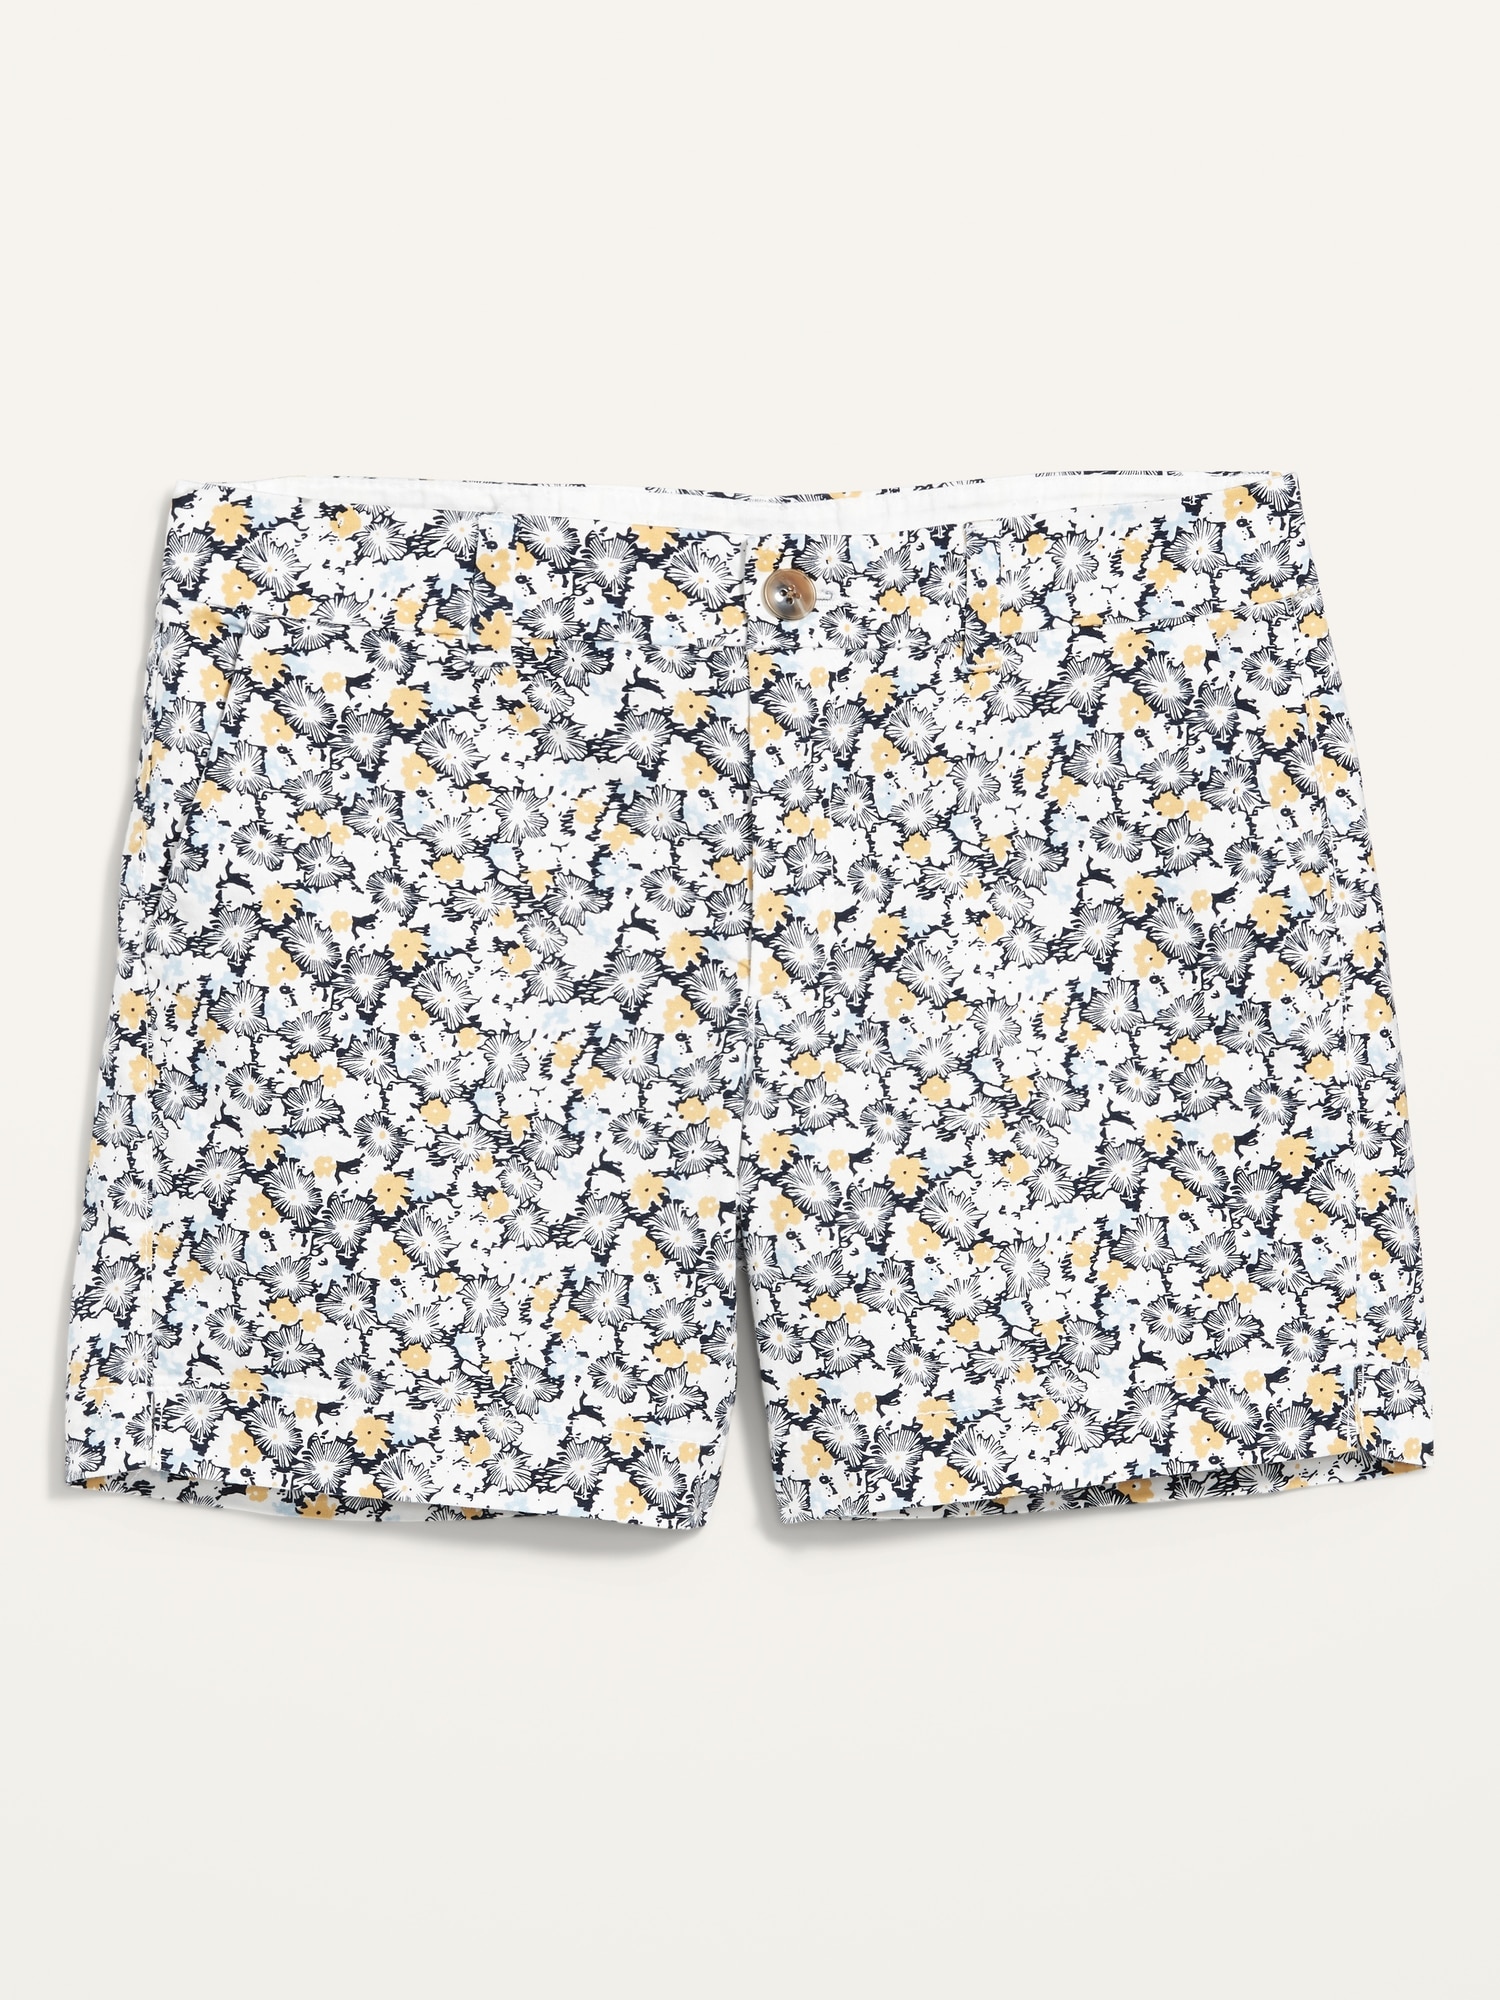 Mid-Rise Everyday Patterned Twill Shorts for Women -- 5-inch inseam